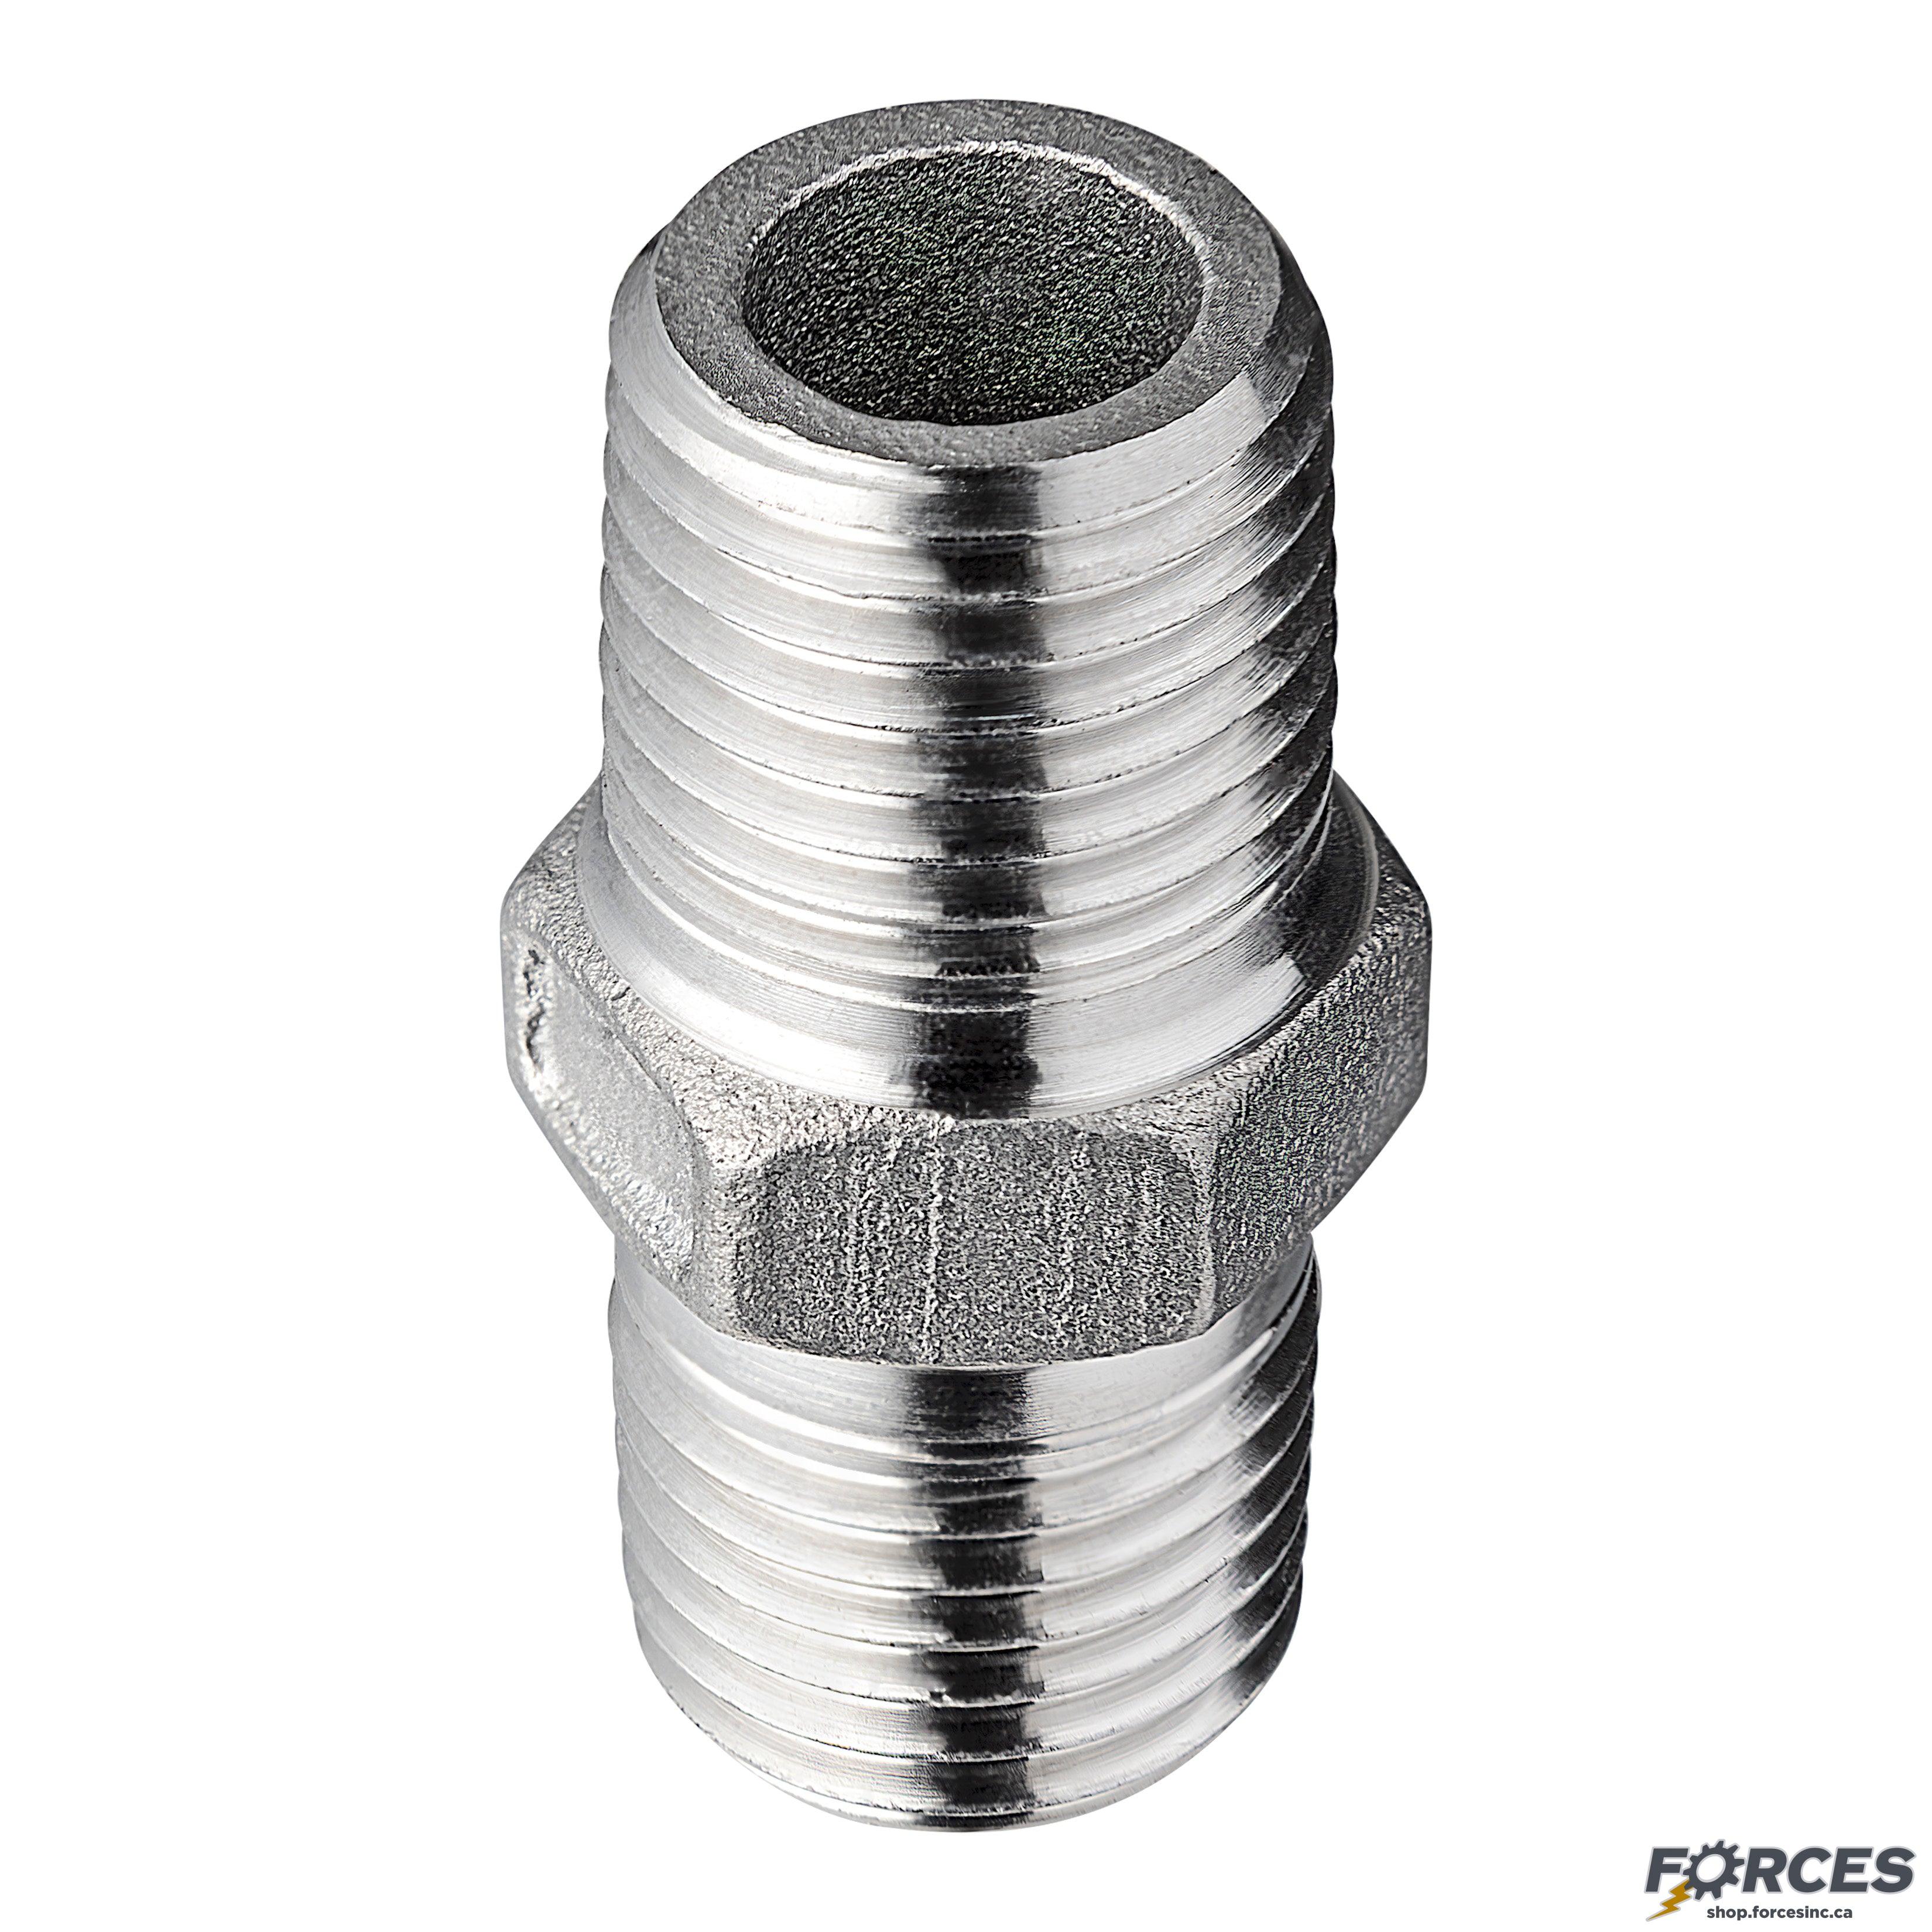 3/4" Hex Nipple NPT #150 - Stainless Steel 316 - Forces Inc